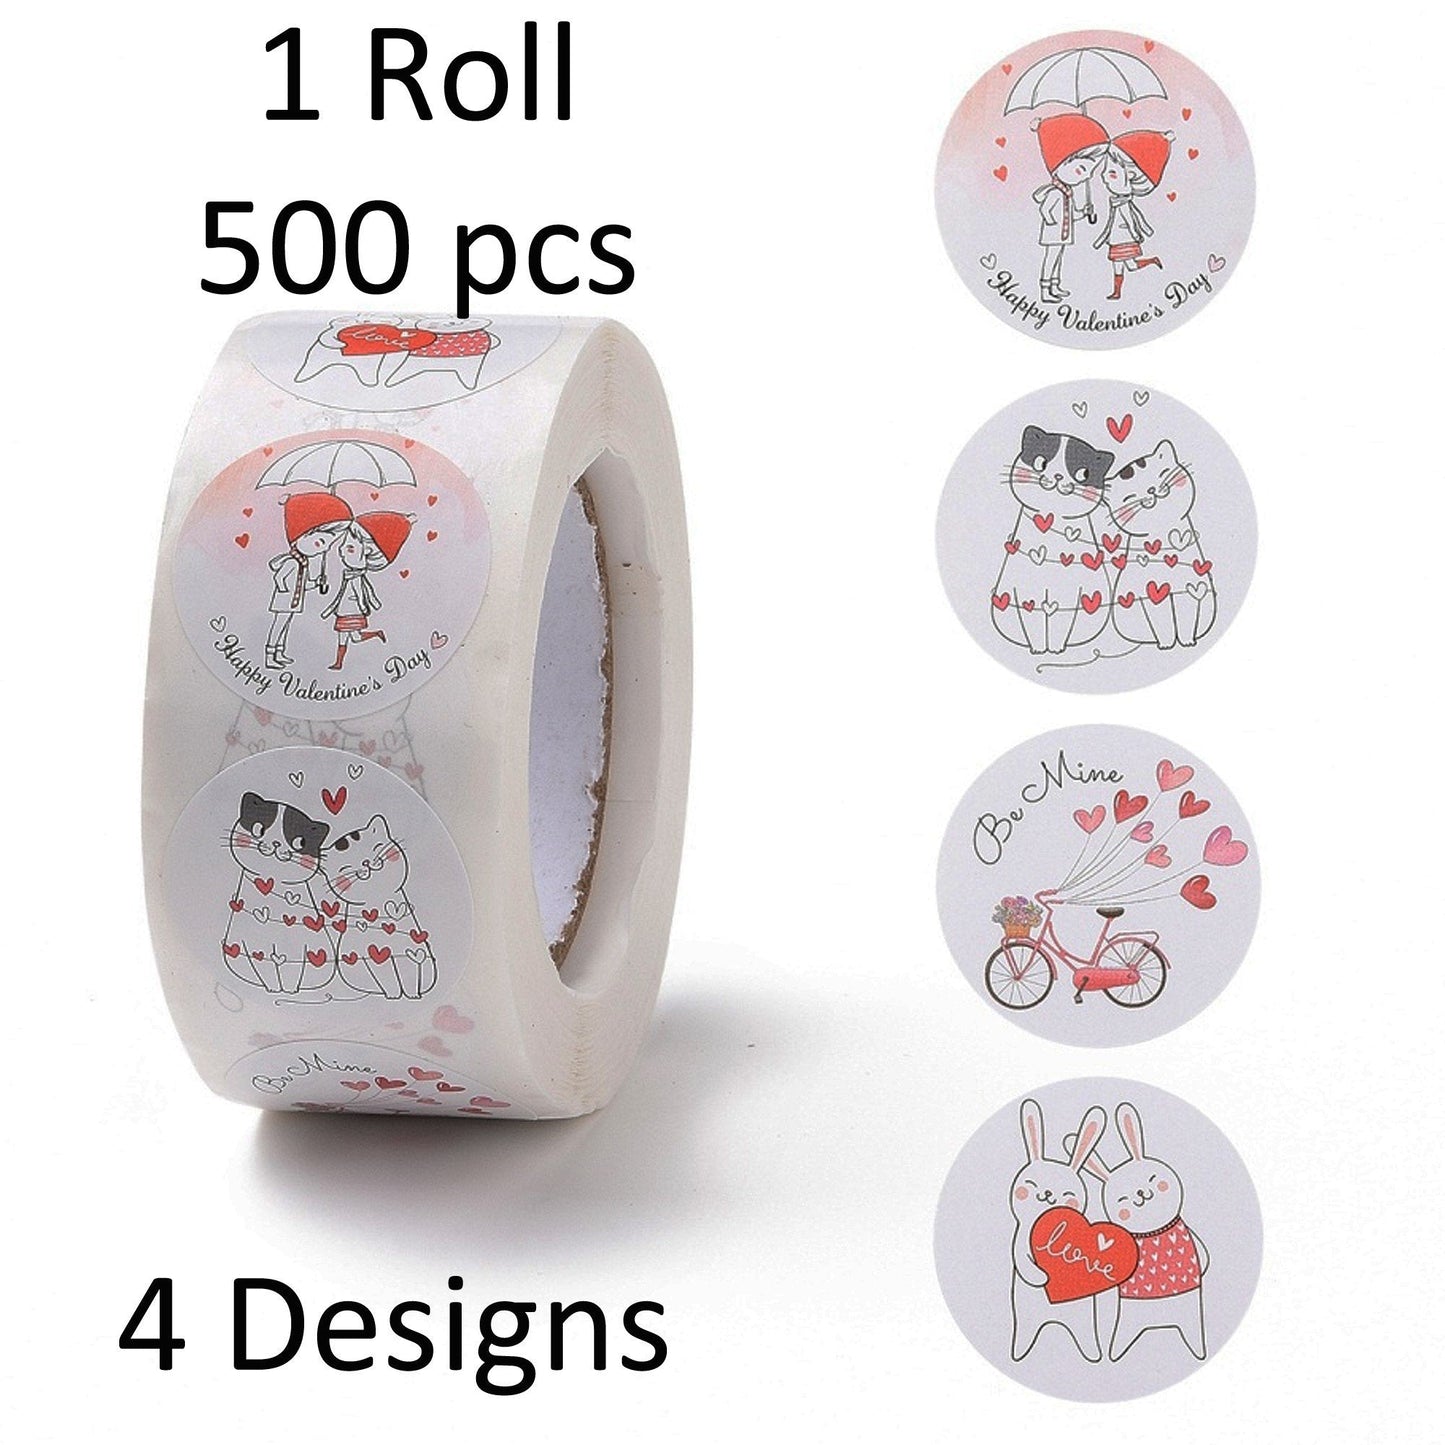 1 Roll 500pcs Cute Valentines Day Theme Self Adhesive Paper Sticker Labels 25mm